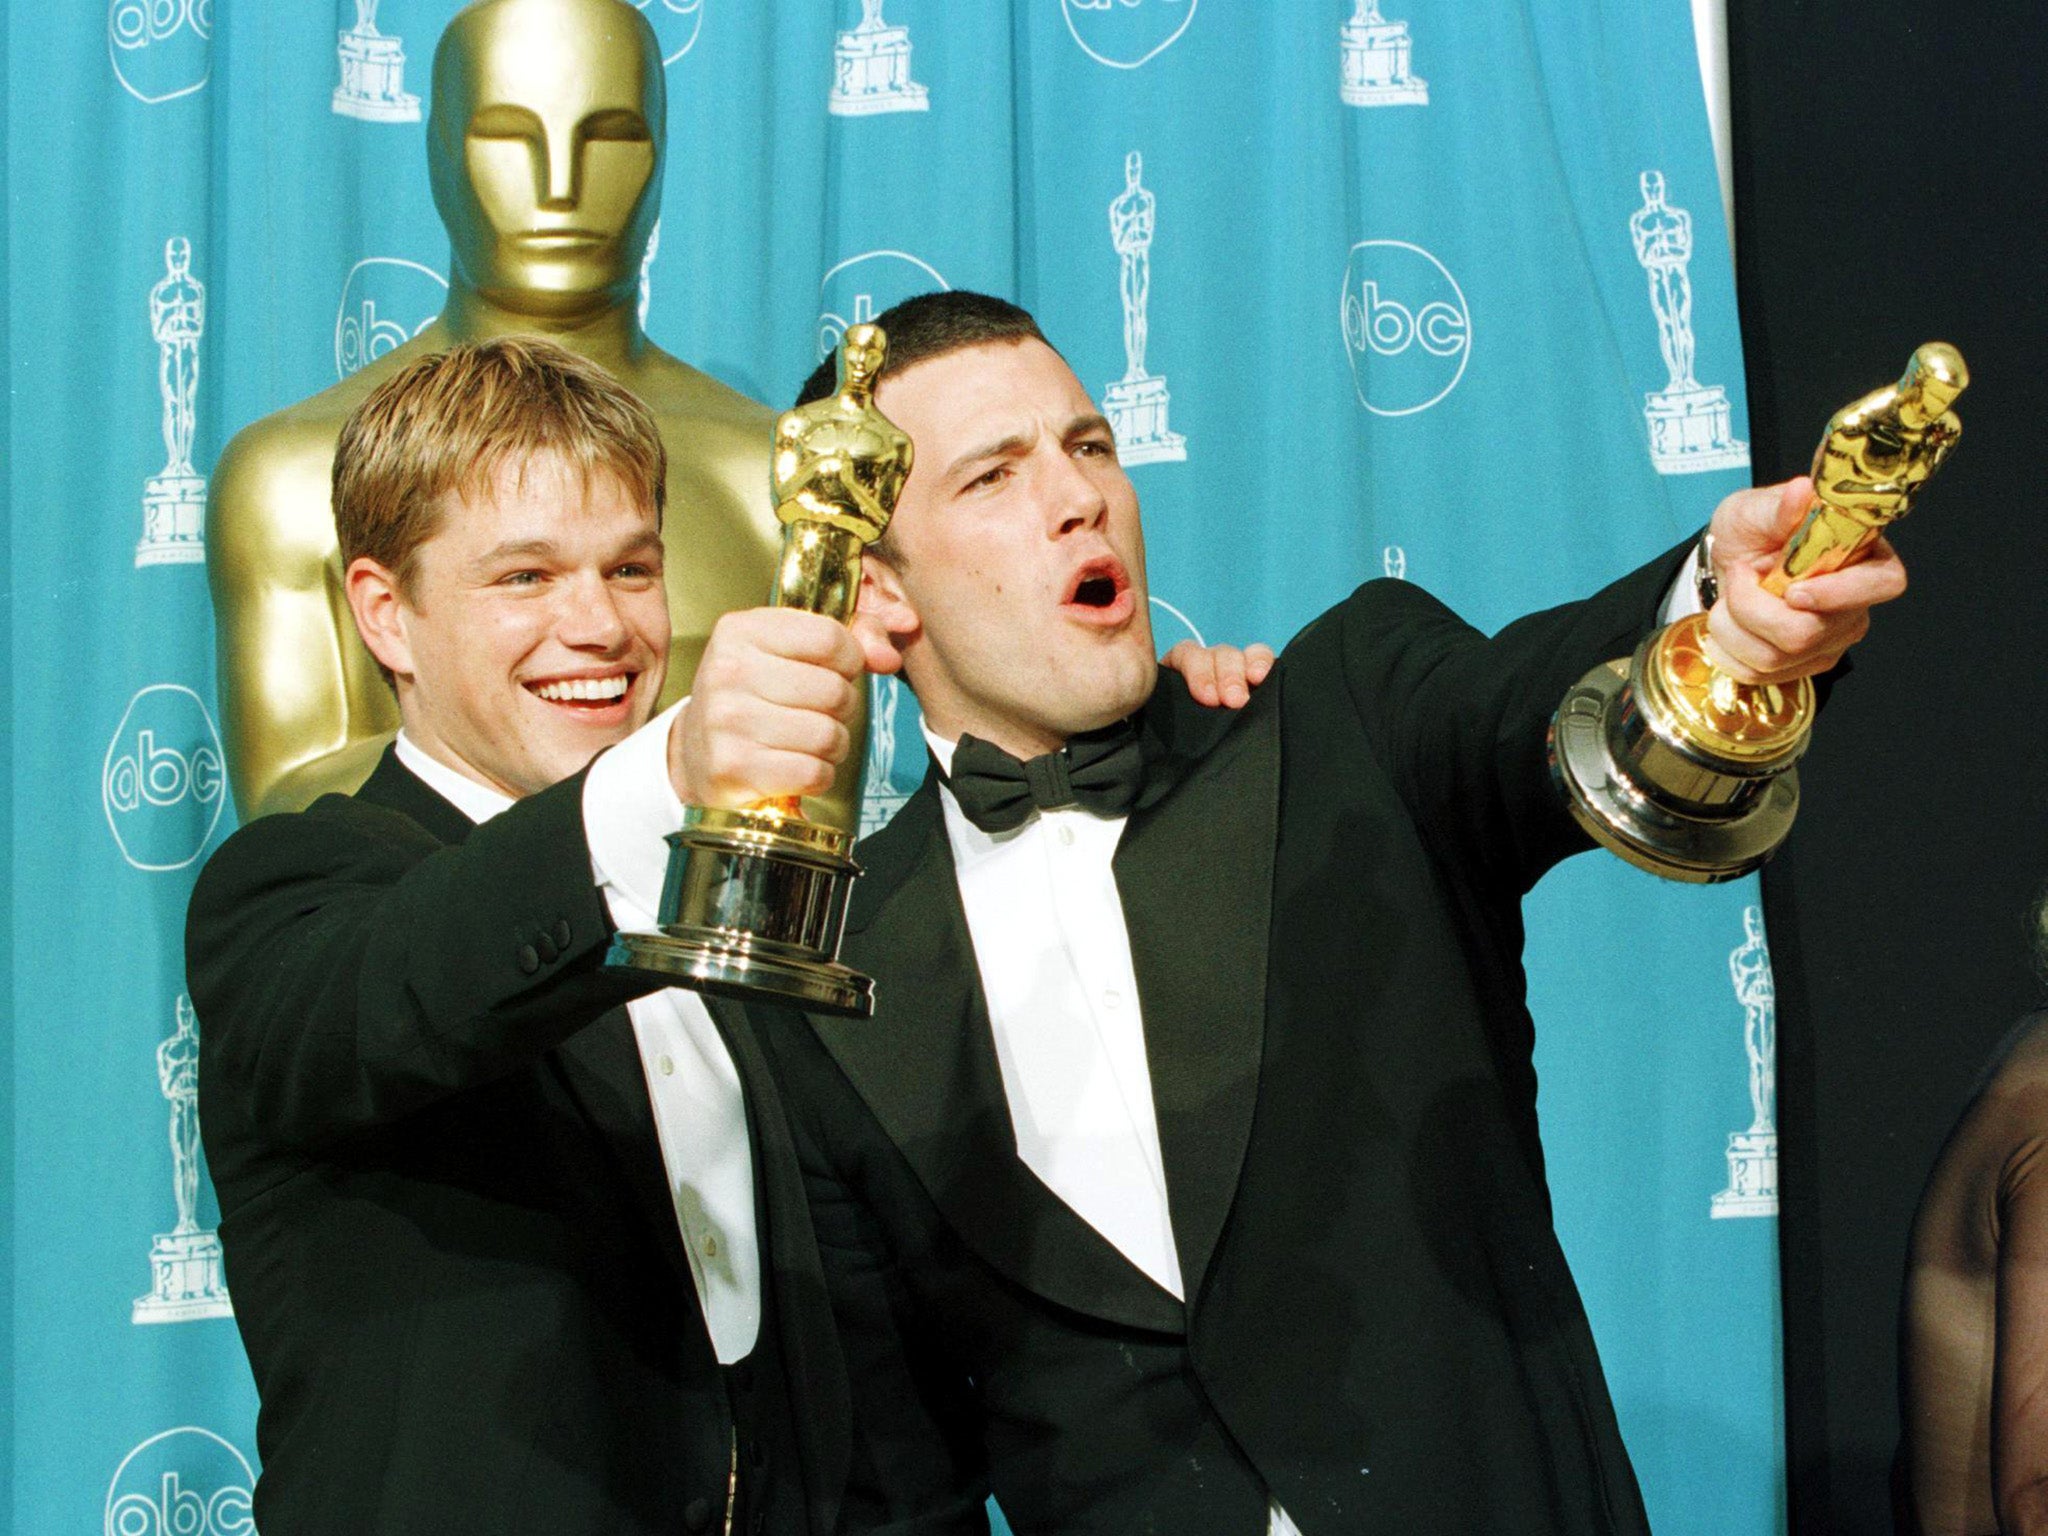 Matt Damon and Ben Affleck with their Oscars for ‘Good Will Hunting' in 1998